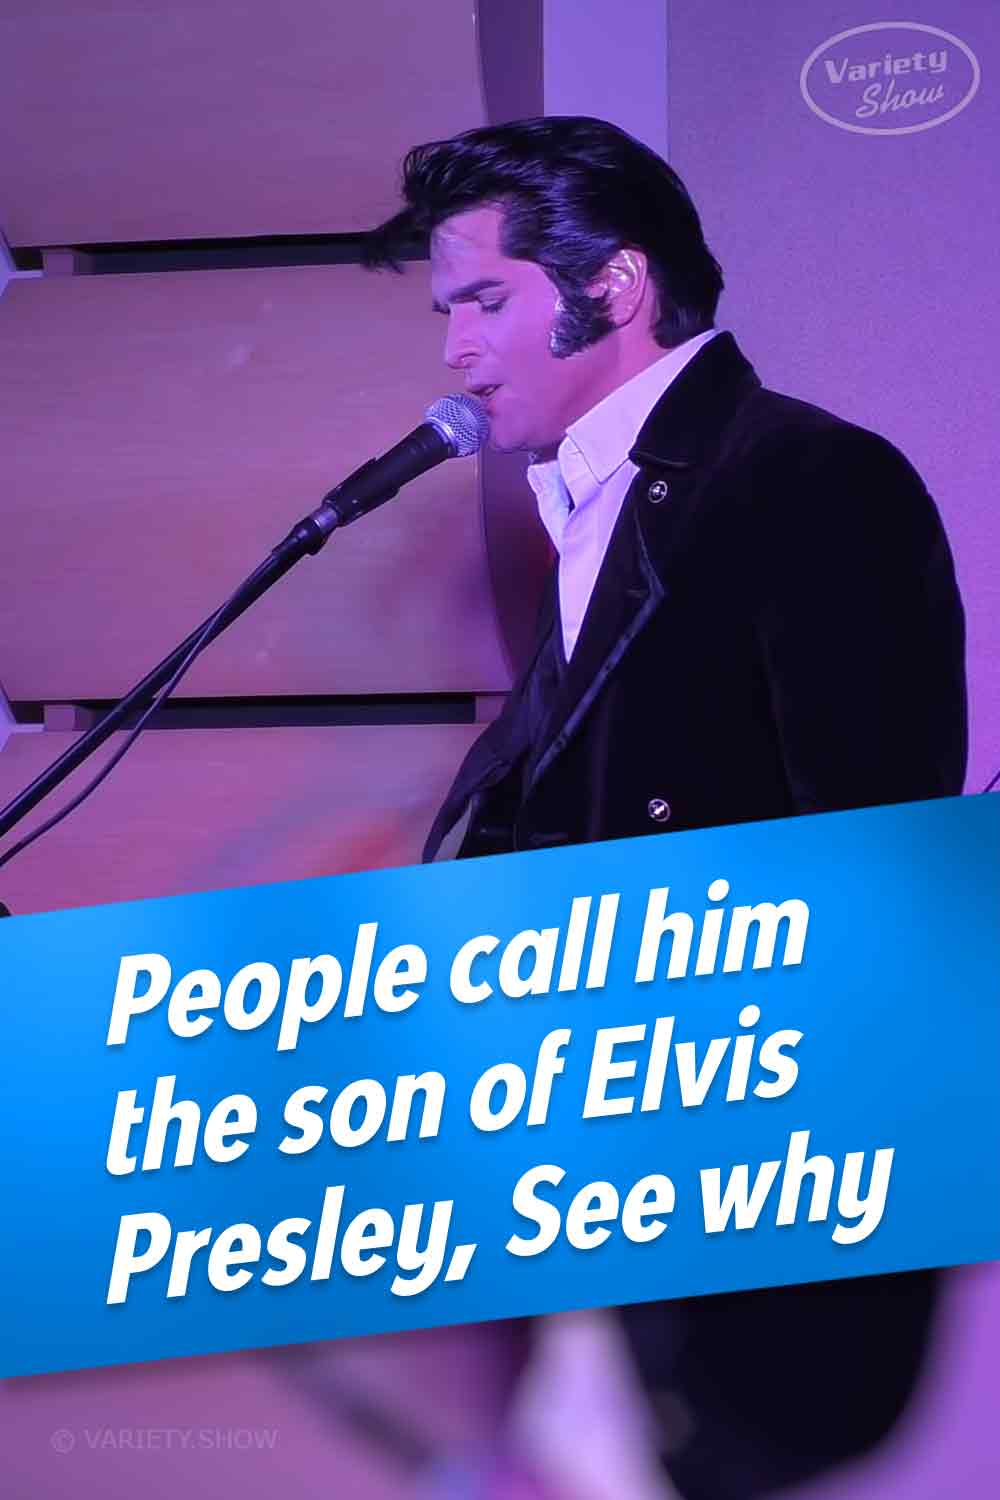 People call him the son of Elvis Presley, See why